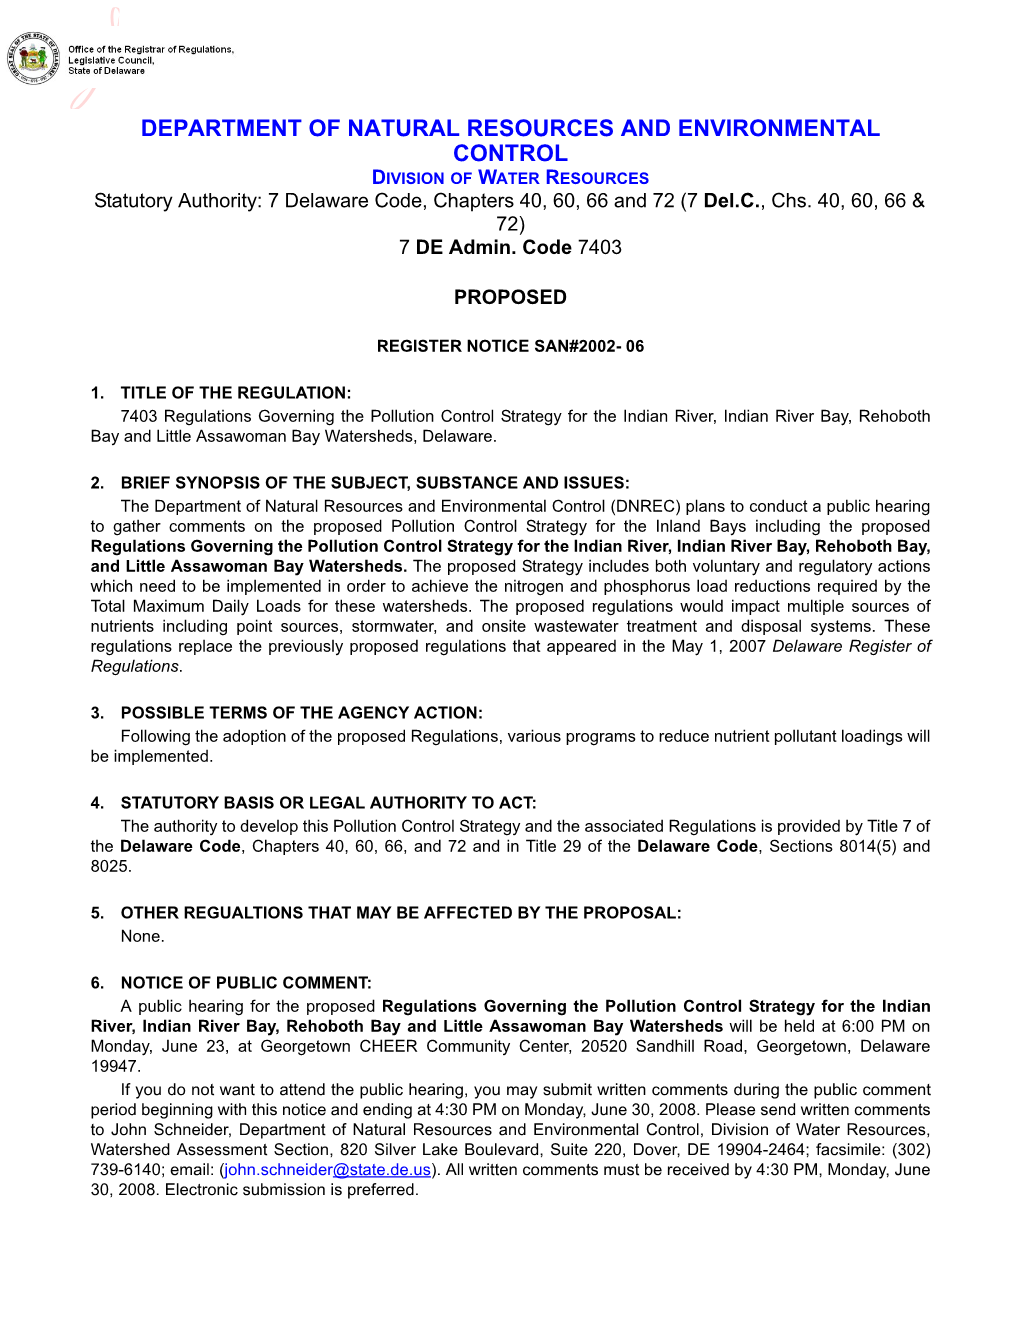 DEPARTMENT of NATURAL RESOURCES and ENVIRONMENTAL CONTROL DIVISION of WATER RESOURCES Statutory Authority: 7 Delaware Code, Chapters 40, 60, 66 and 72 (7 Del.C., Chs